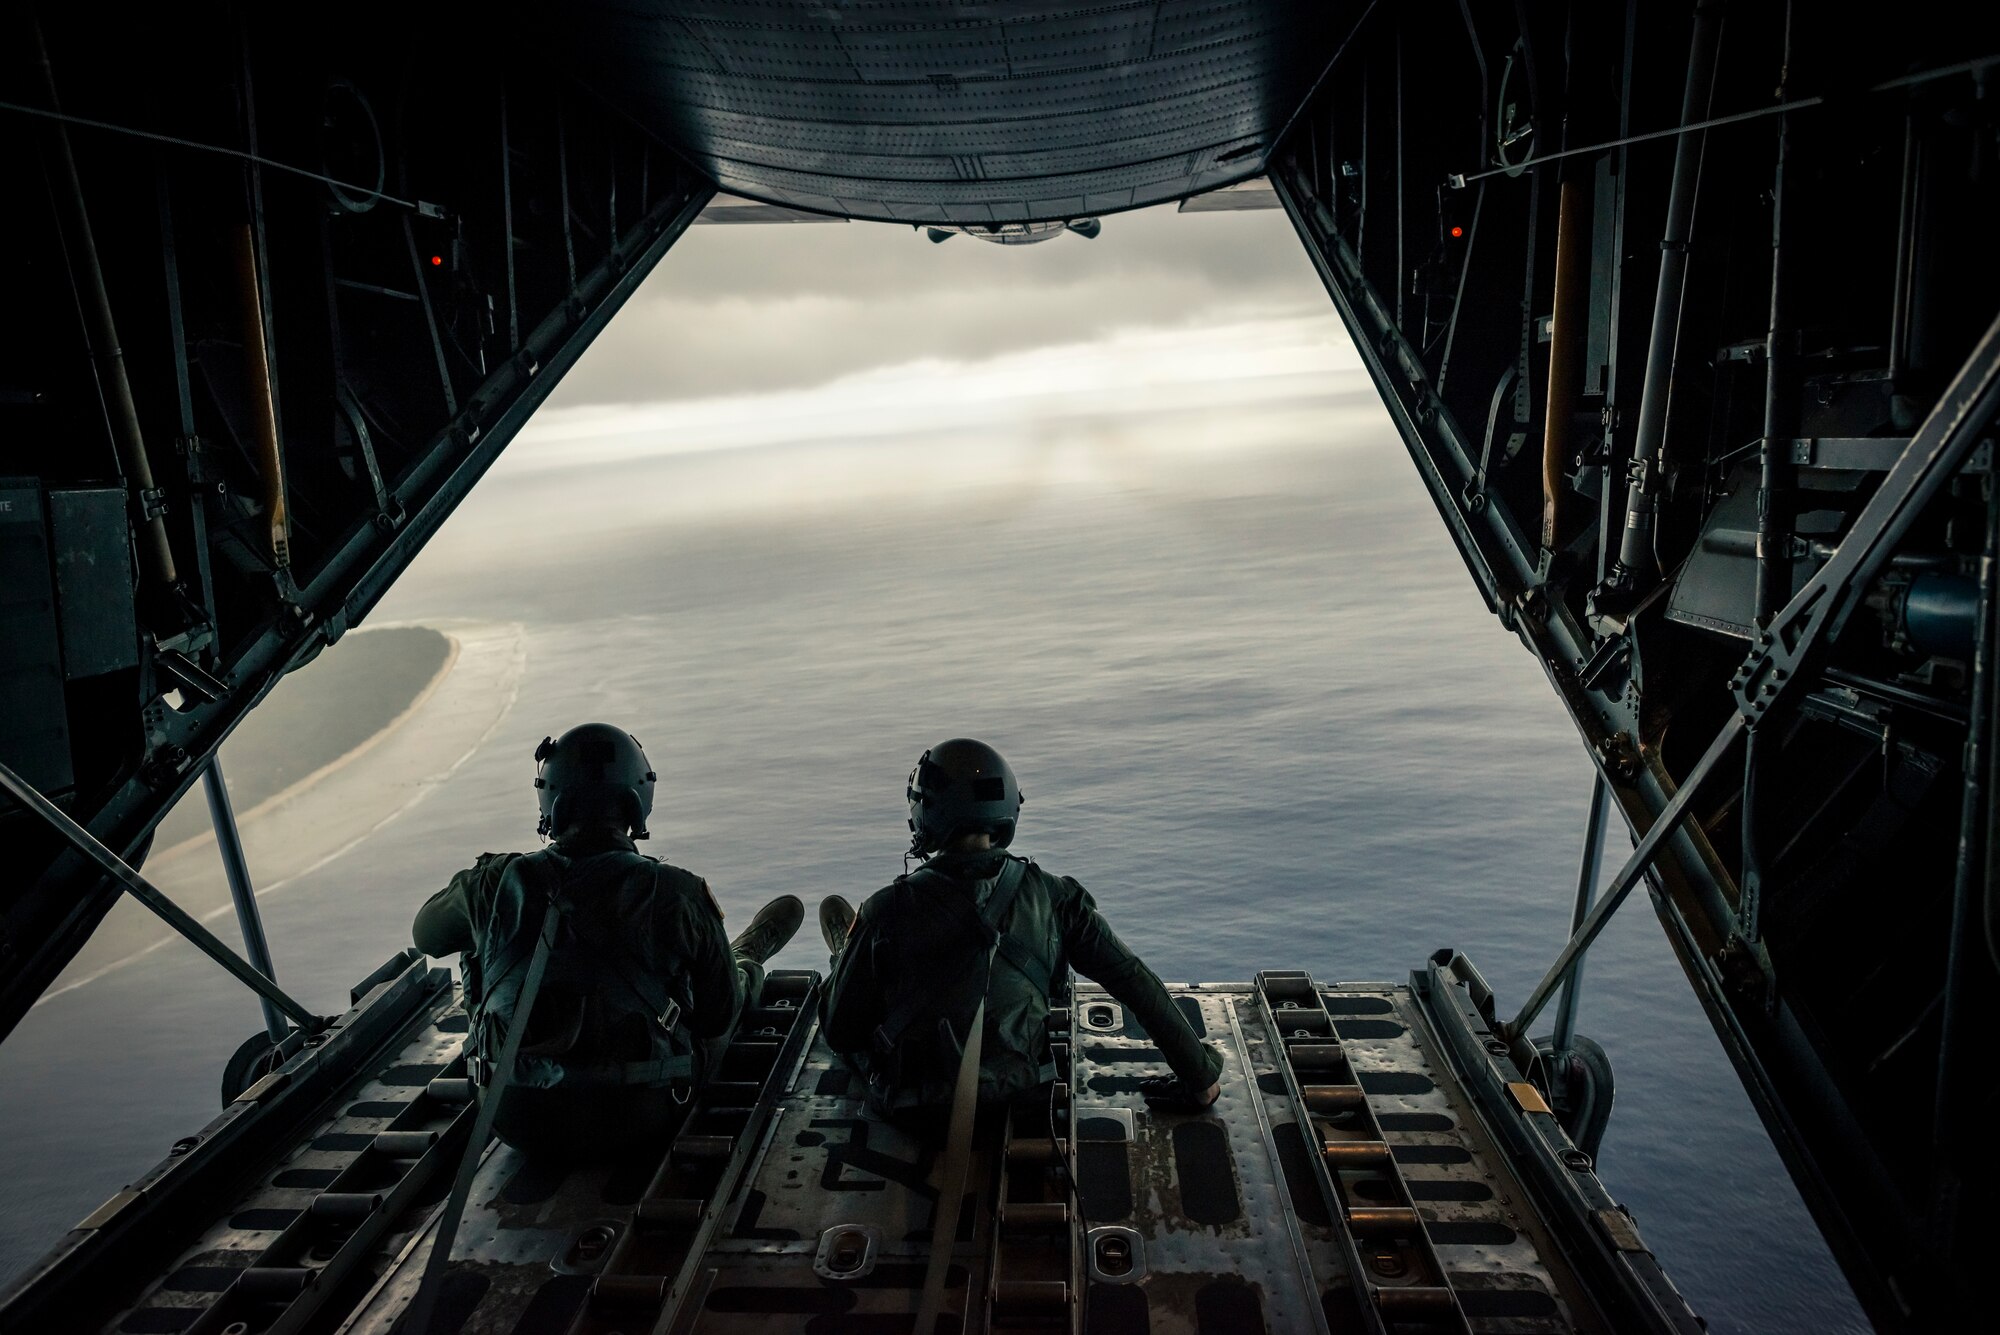 OVER THE PACIFIC OCEAN -- Capt. Ryan Turonek, left, and Senior Airman Timothy Oberman, 36th Airlift Squadron, sit on the back ramp of a C-130 Hercules after a successful low-cost, low altitude drop during Operation Christmas Drop Dec. 13, 2012. While used as a training opportunity for C-130 crews, each crew member expressed how gratifying it was to make a difference in the lives of the Pacific islanders they dropped humanitarian aid to. (U.S. Air Force photo by Tech. Sgt. Samuel Morse)